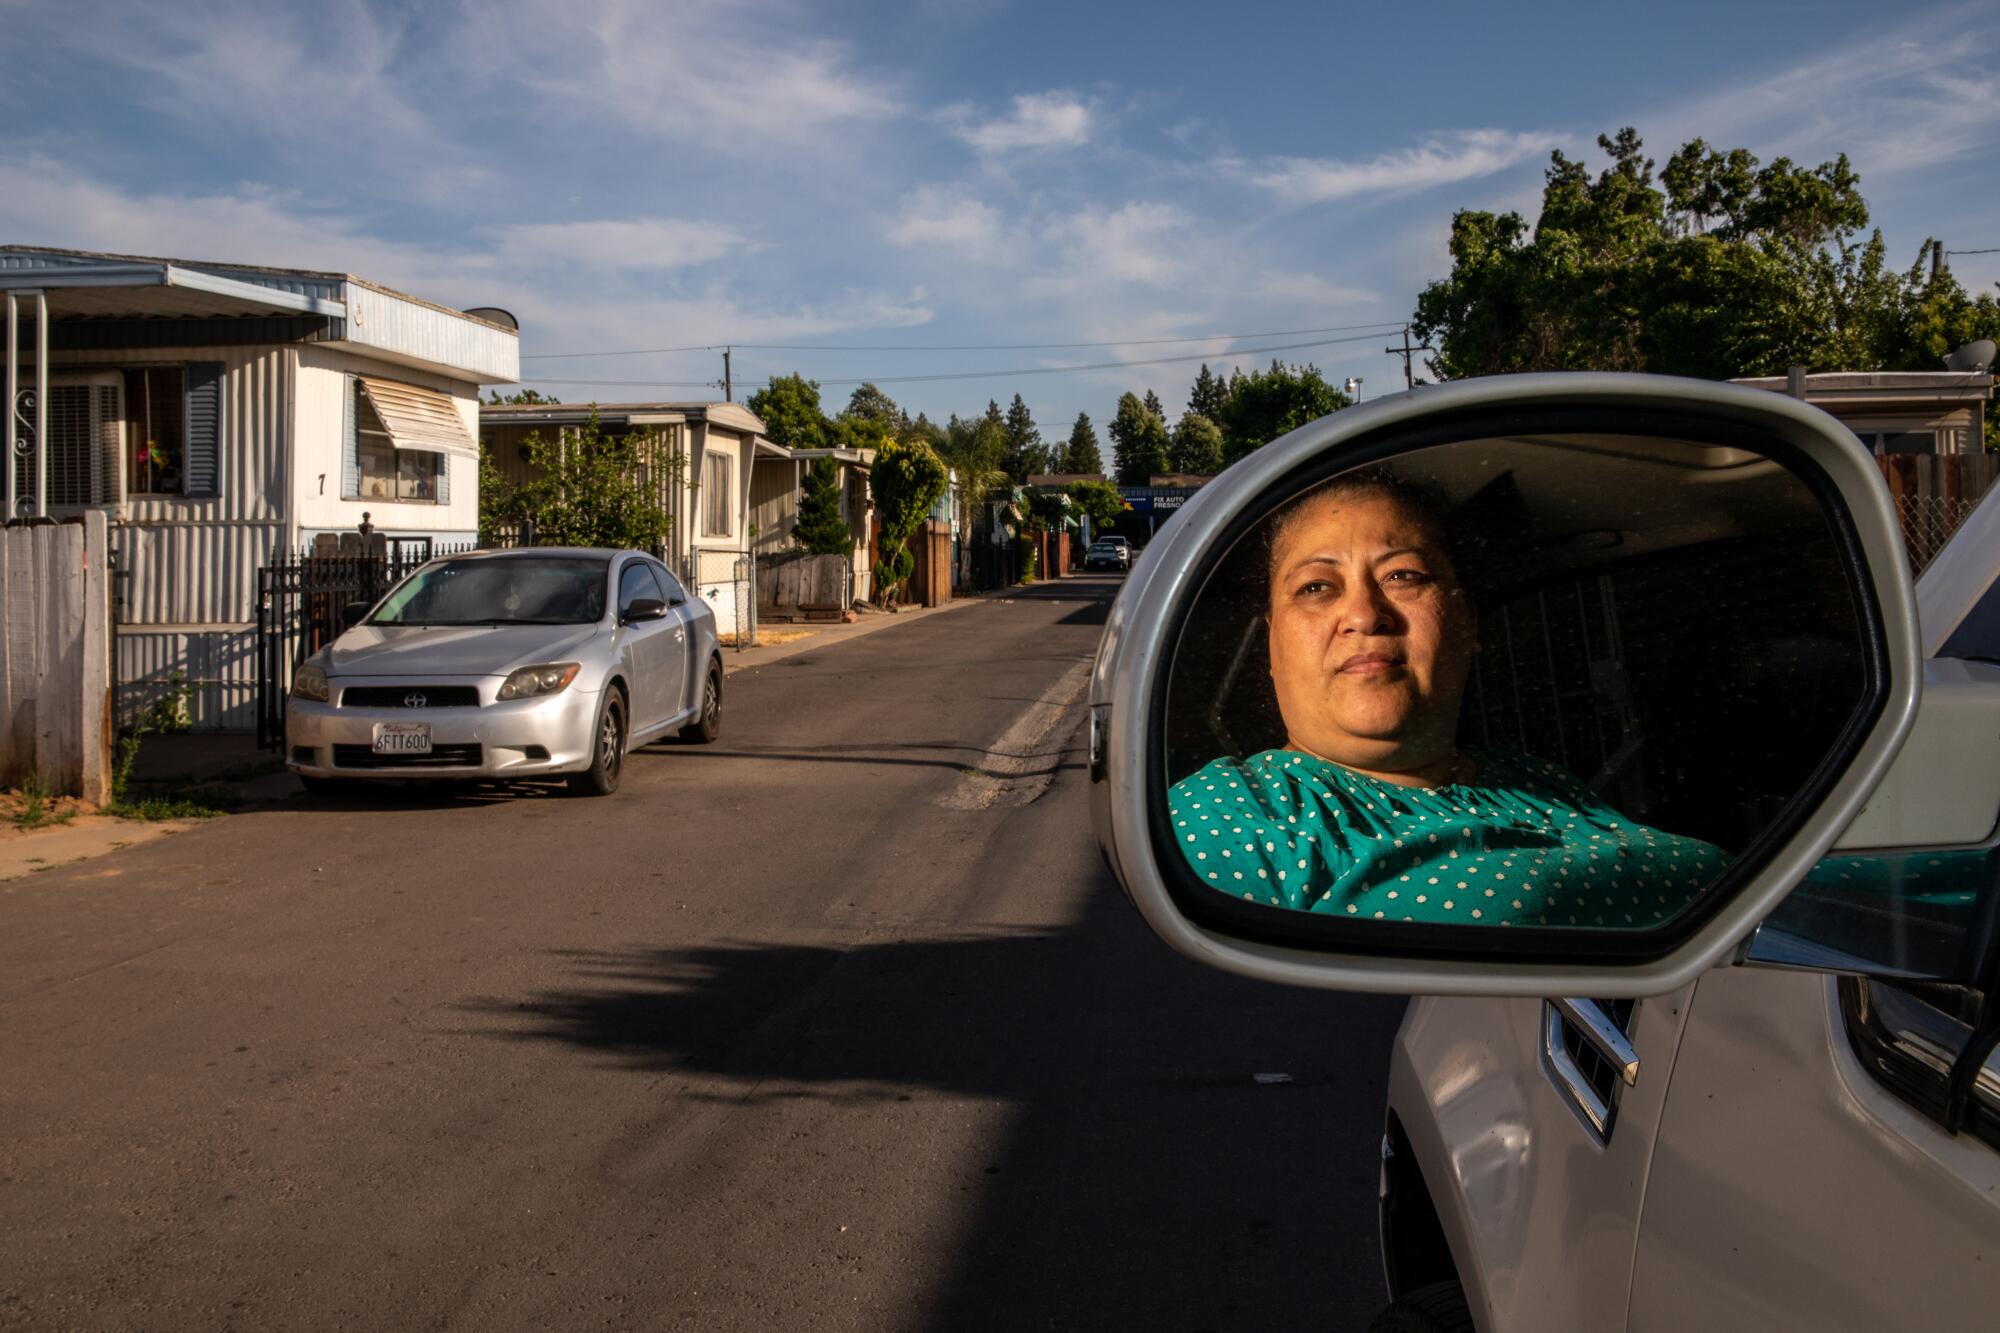 Jackelyne Garcia, 47, who lives with 4 children in a single wide mobile home for last 13 years in La Hacienda Mobile Estate